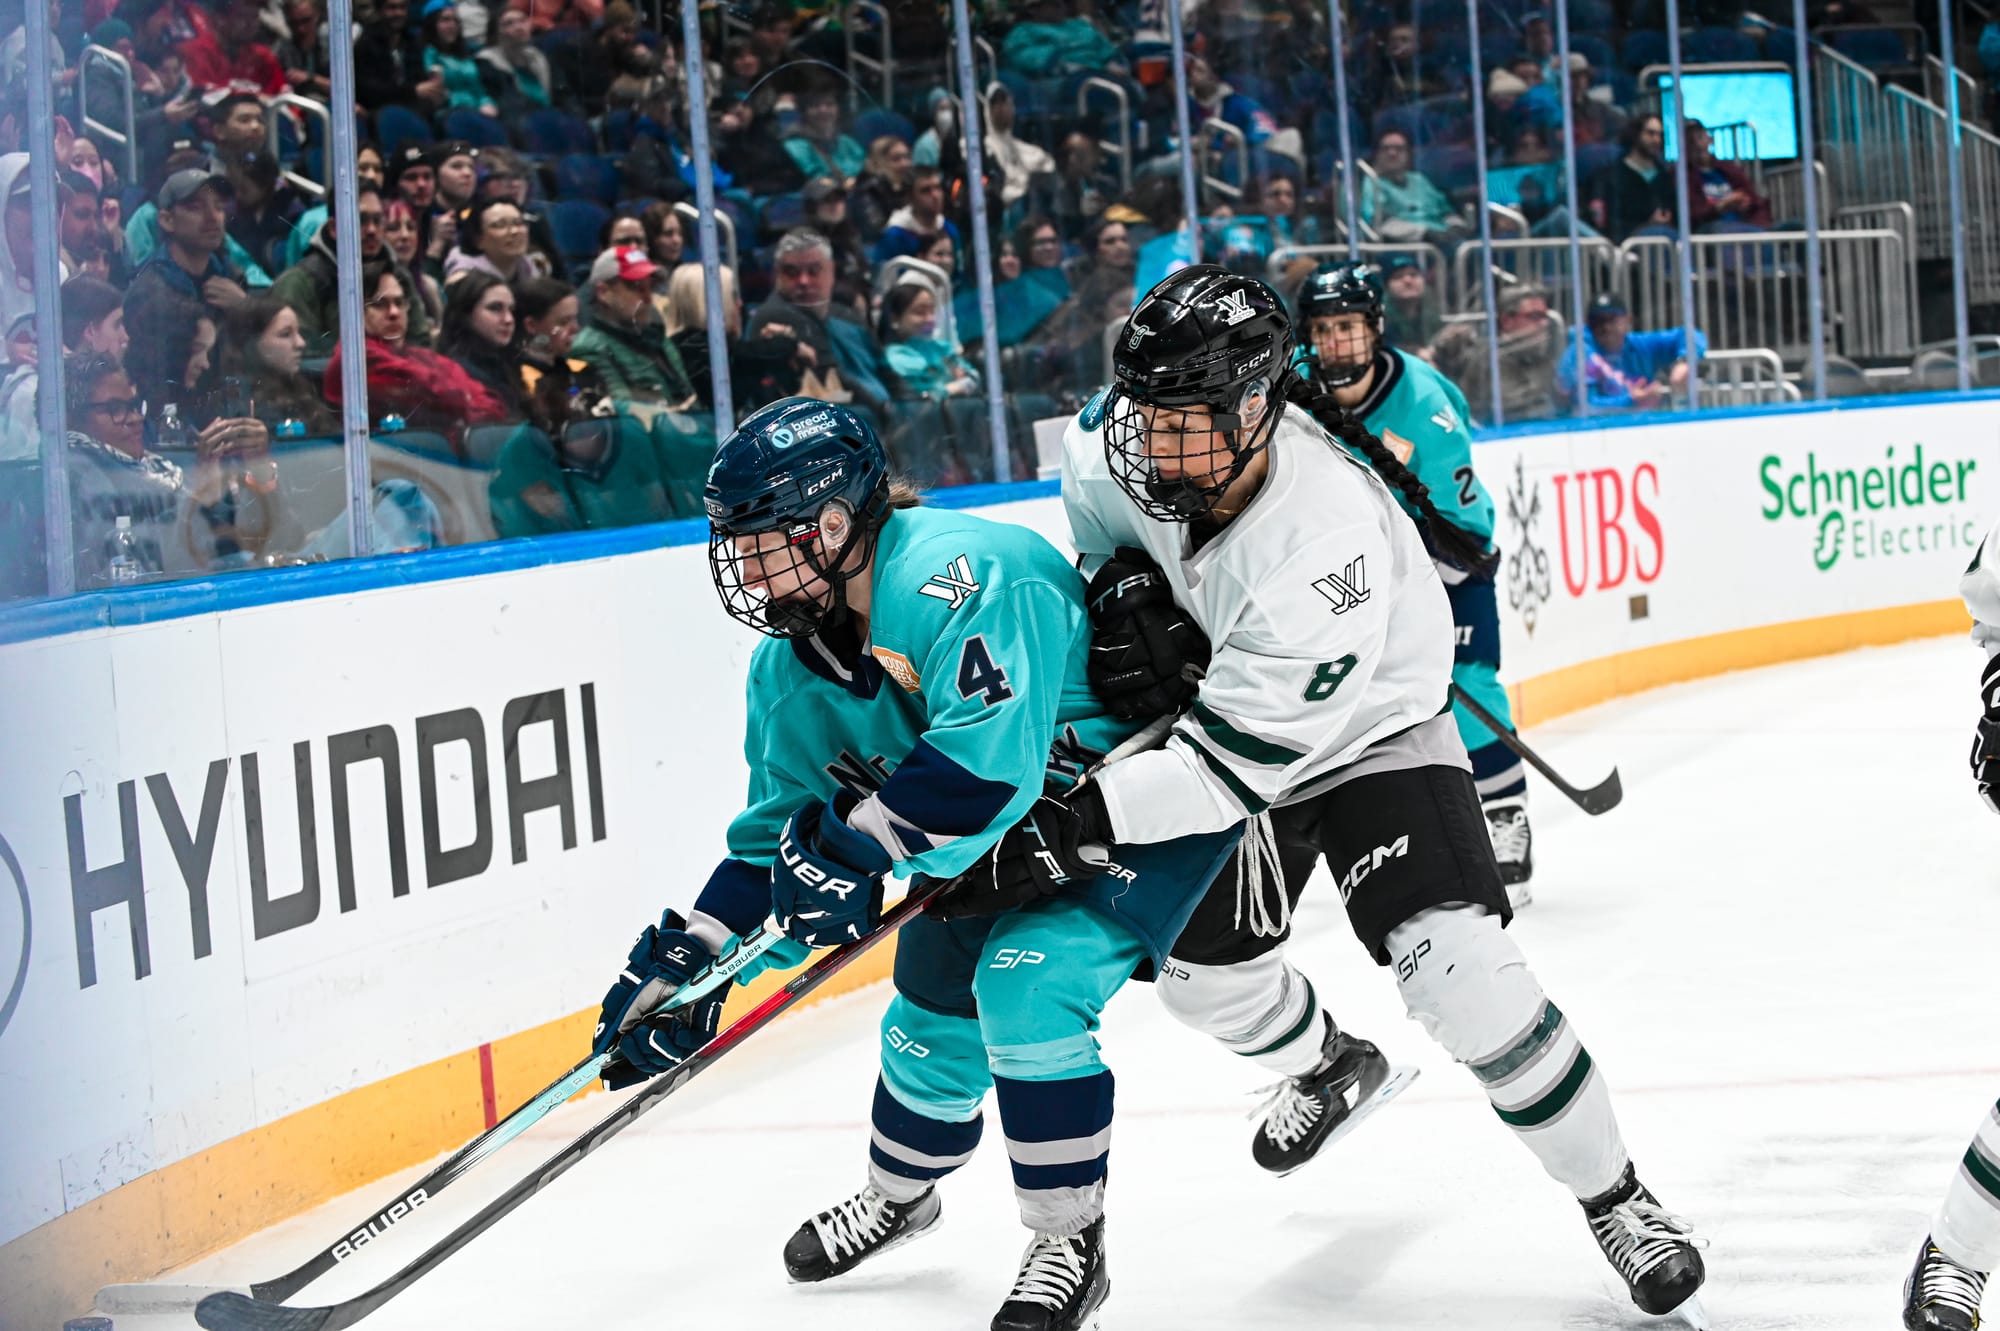 Taylor Baker tries to protect the puck from Lexie Adzija. Baker is hunched over further into the corner, as Adzija reaches around her. Baker is in a teal home uniform, while Adzija is in a white away uniform.